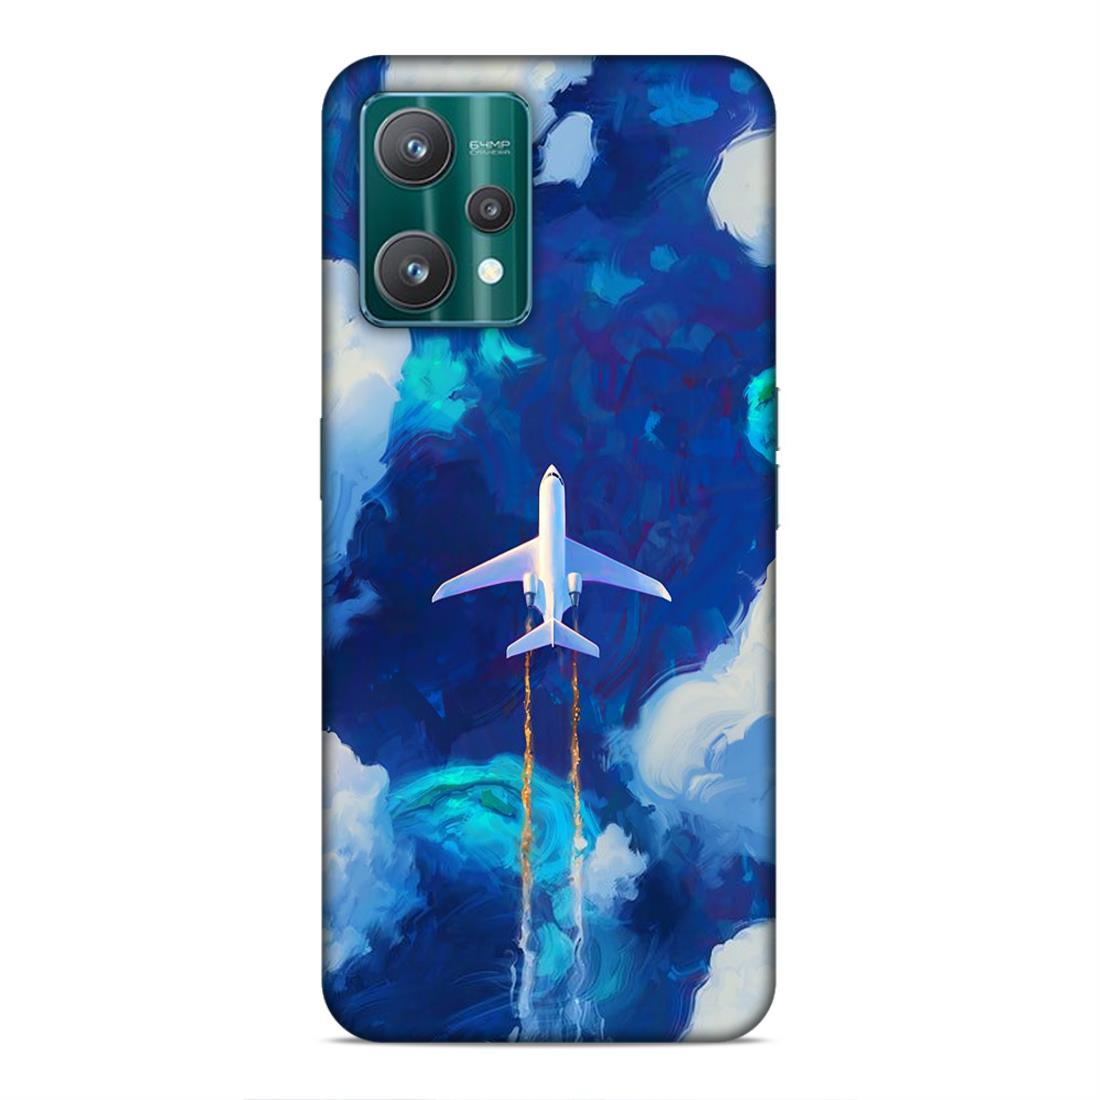 Aeroplane In The Sky Hard Back Case For Realme 9 Pro